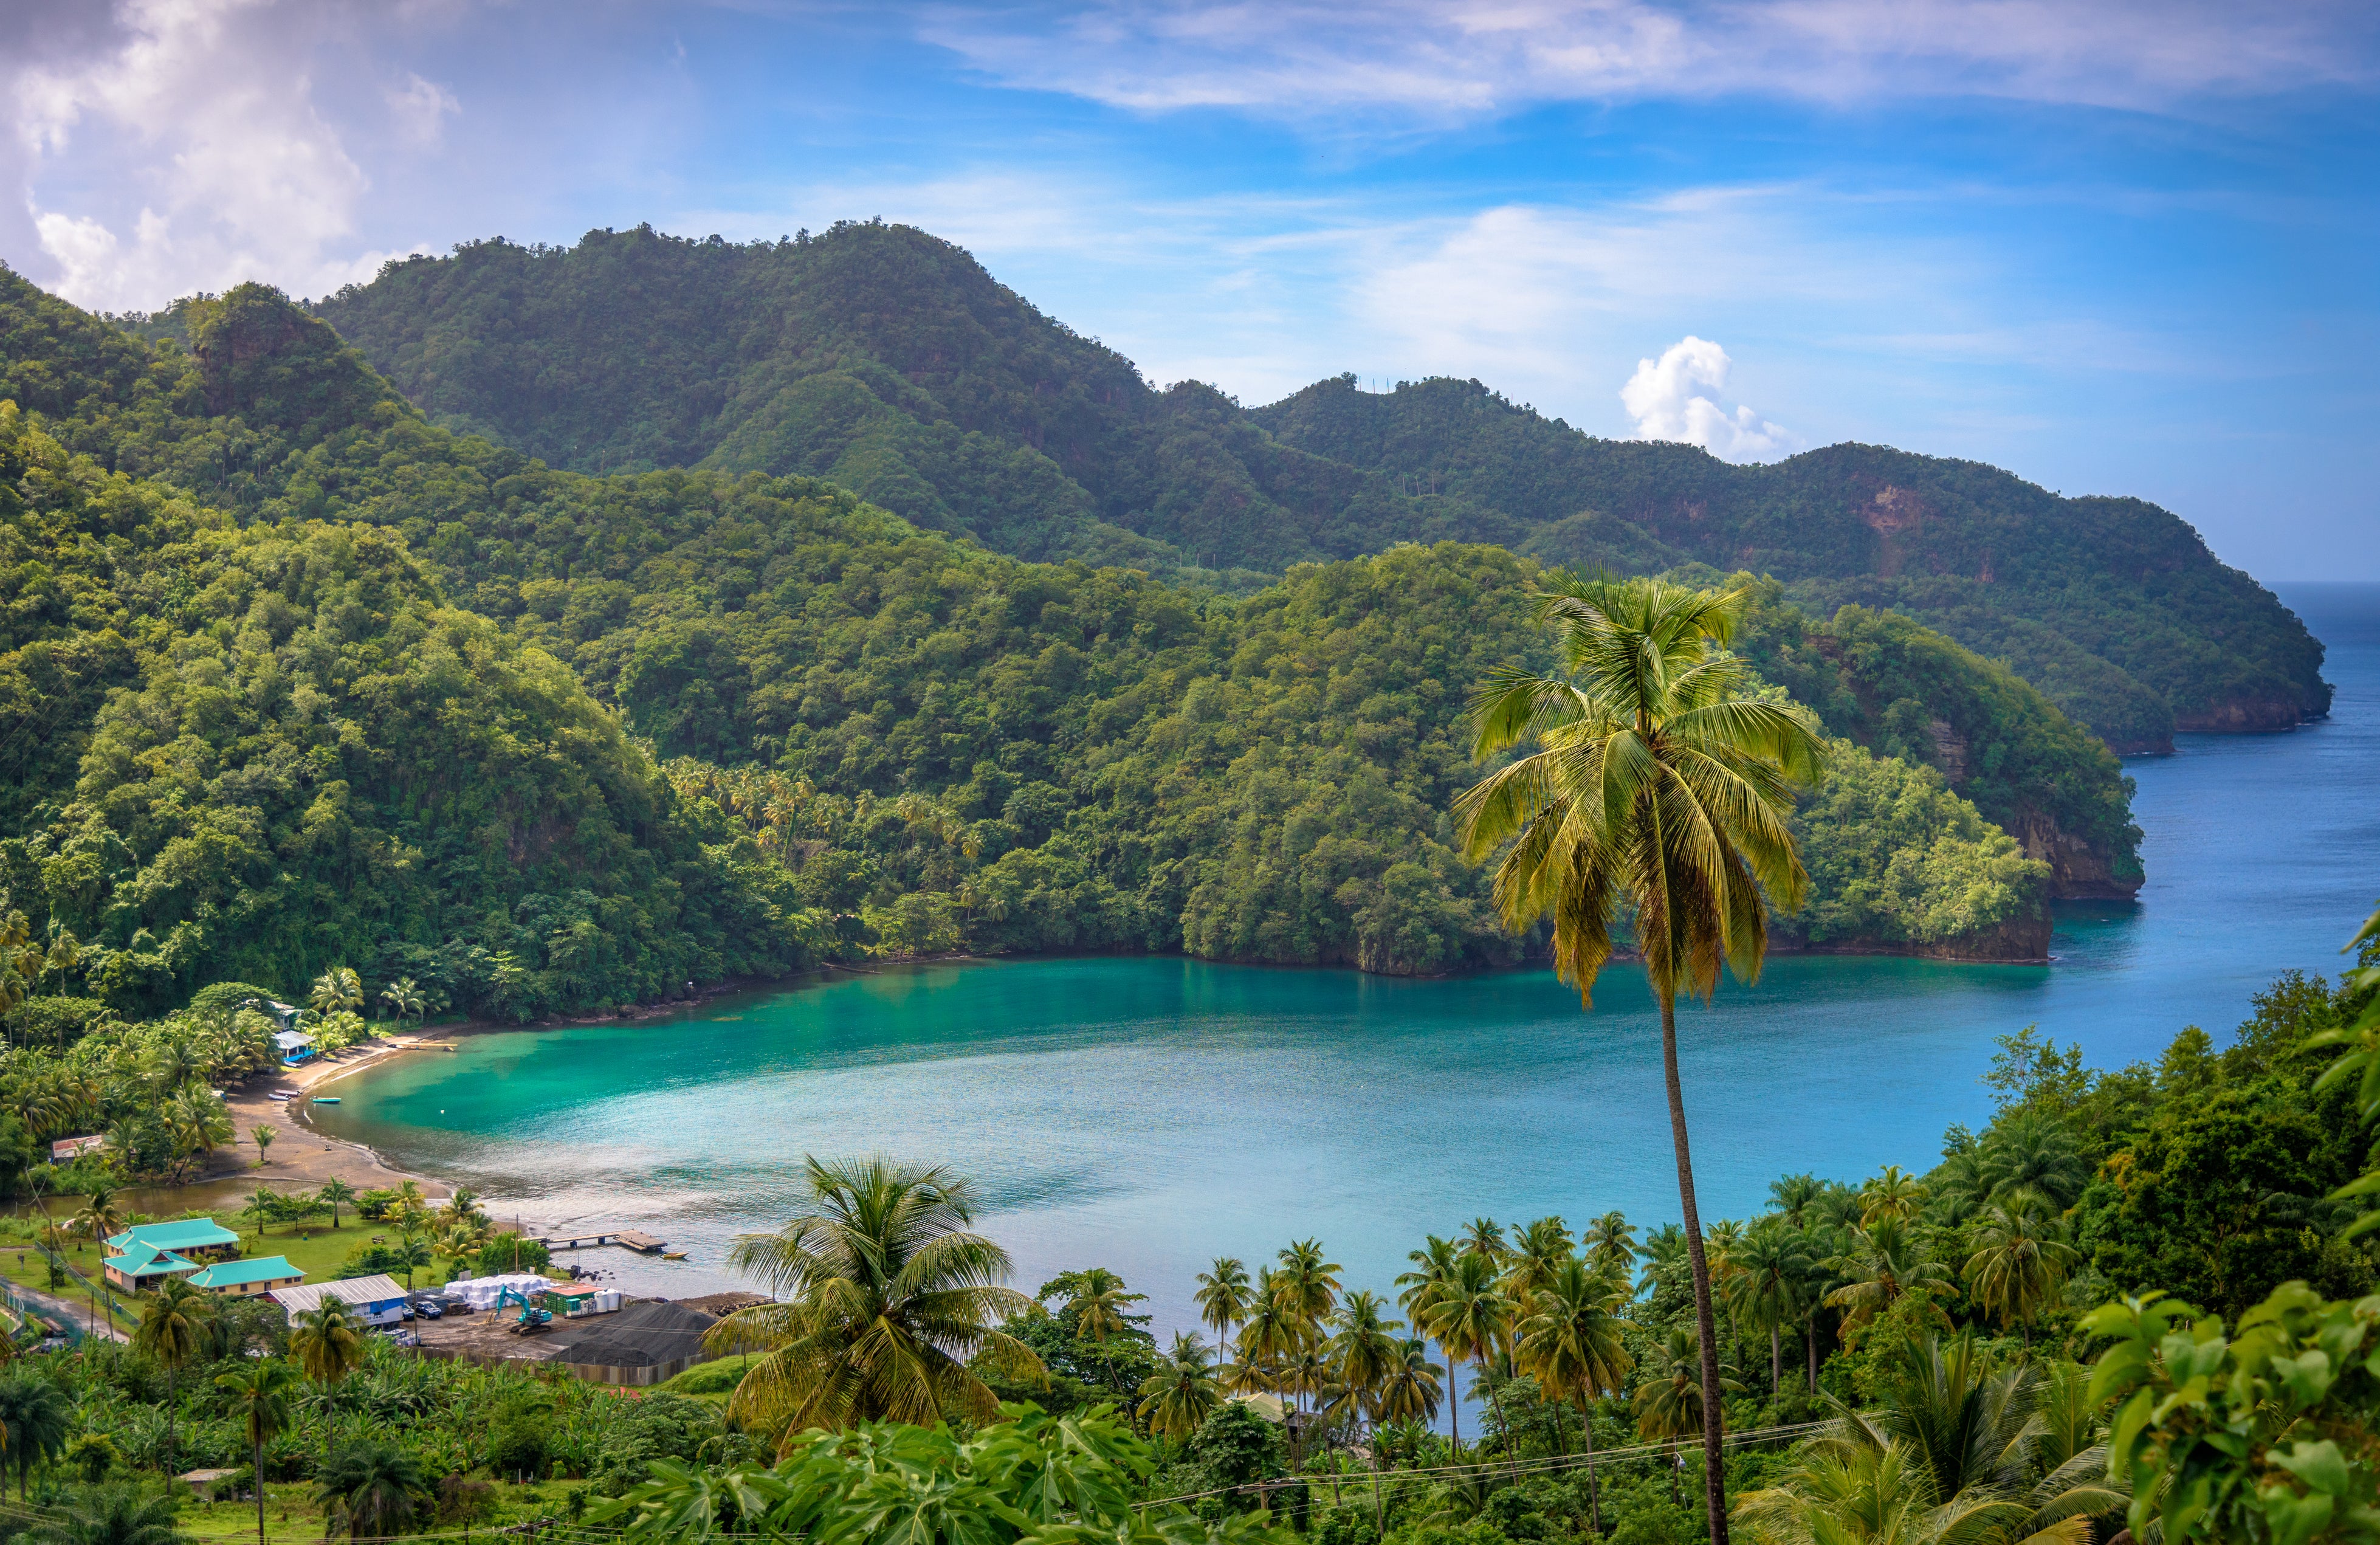 Fringed by palm groves, the coves of St Vincent offer isolated stretches of black and white sand beach